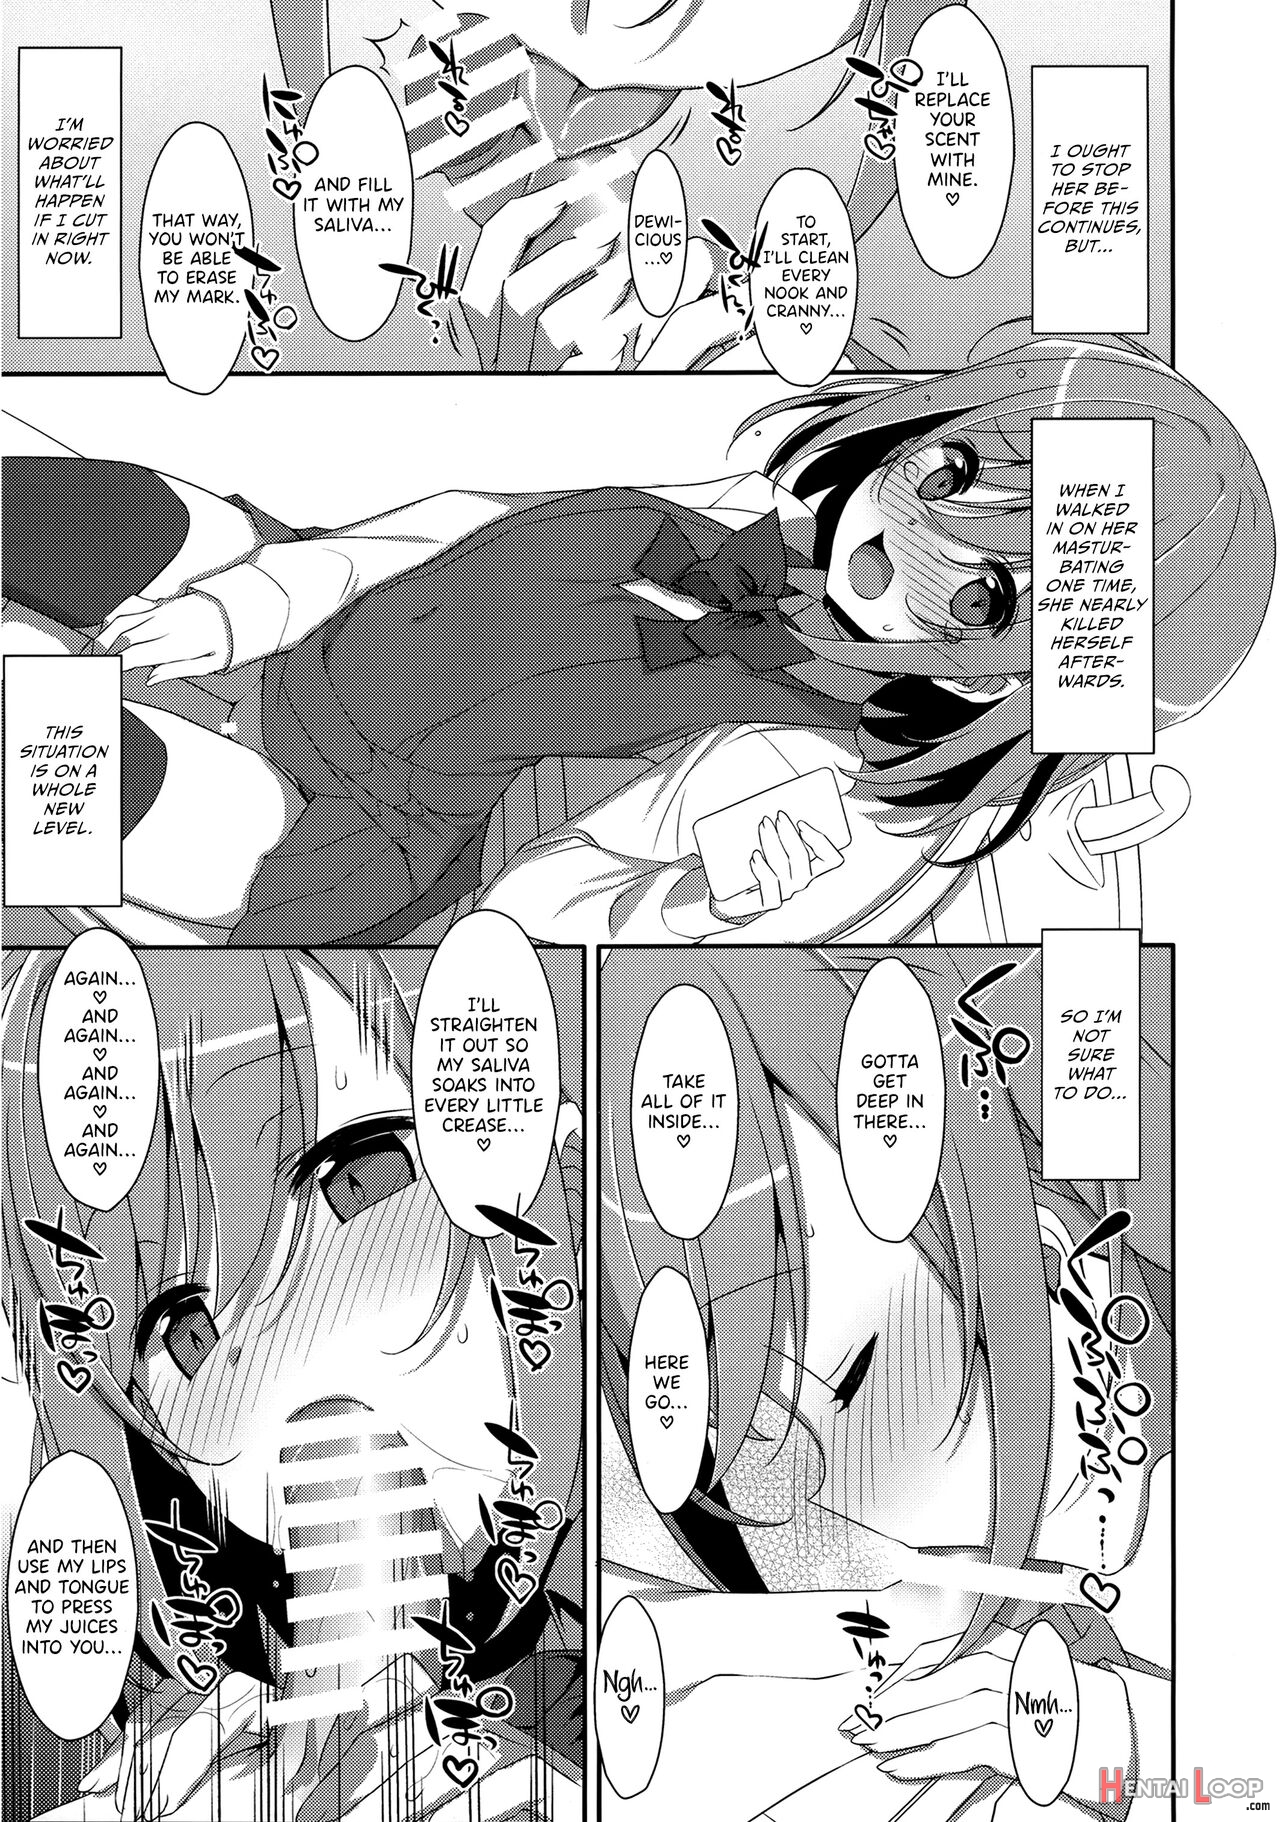 I Want To Do Lots Of Things With My Sleeping Onii-chan! page 9